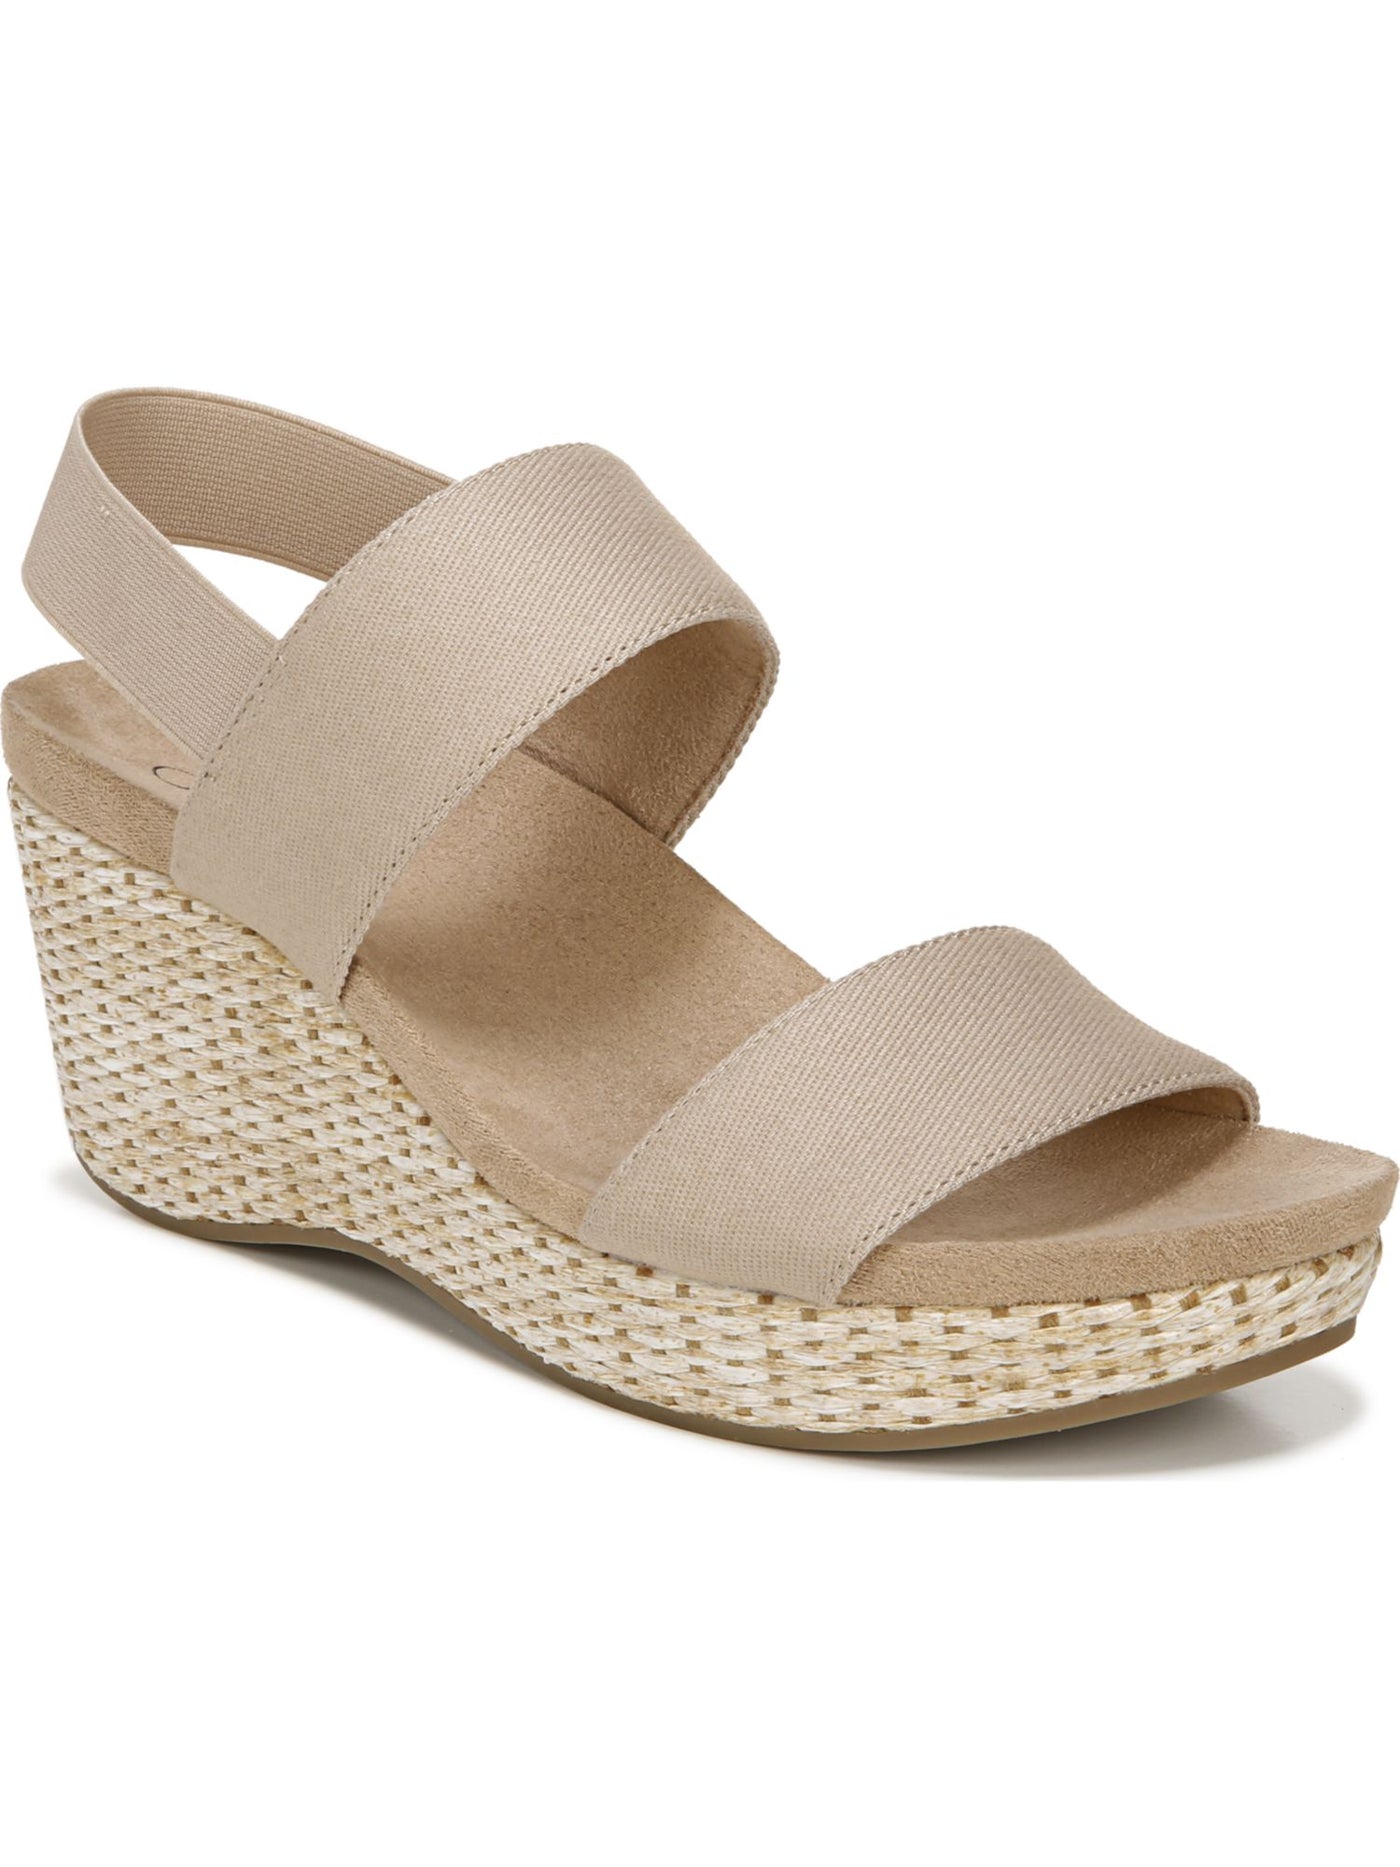 LIFE STRIDE Womens Beige Traction Sole Woven 1" Platform Goring Cushioned Delta Round Toe Wedge Slip On Slingback Sandal 6 M